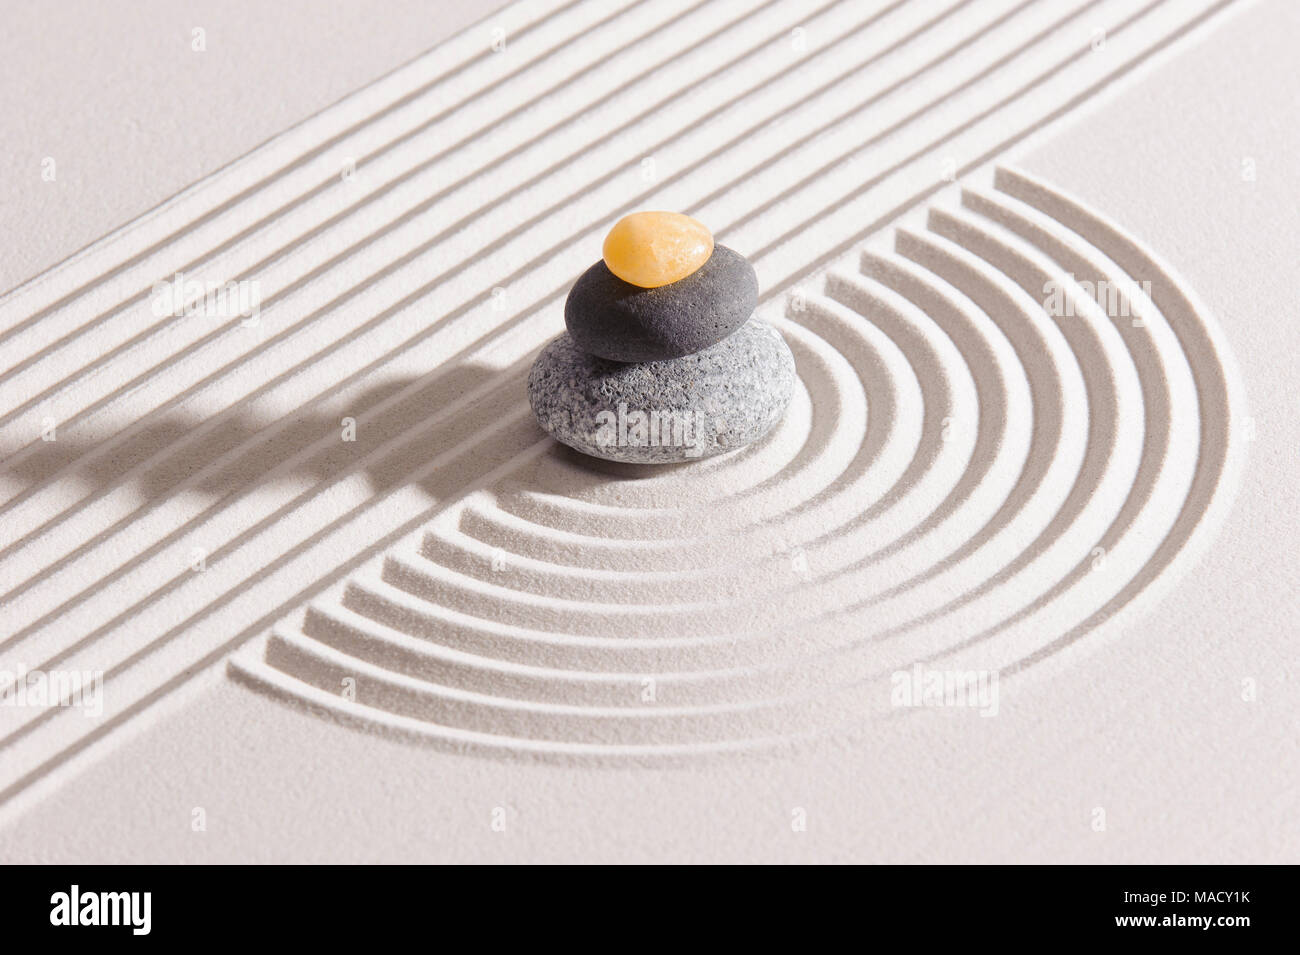 Japanese Zen garden of tranquility with stone in textured sand Stock Photo